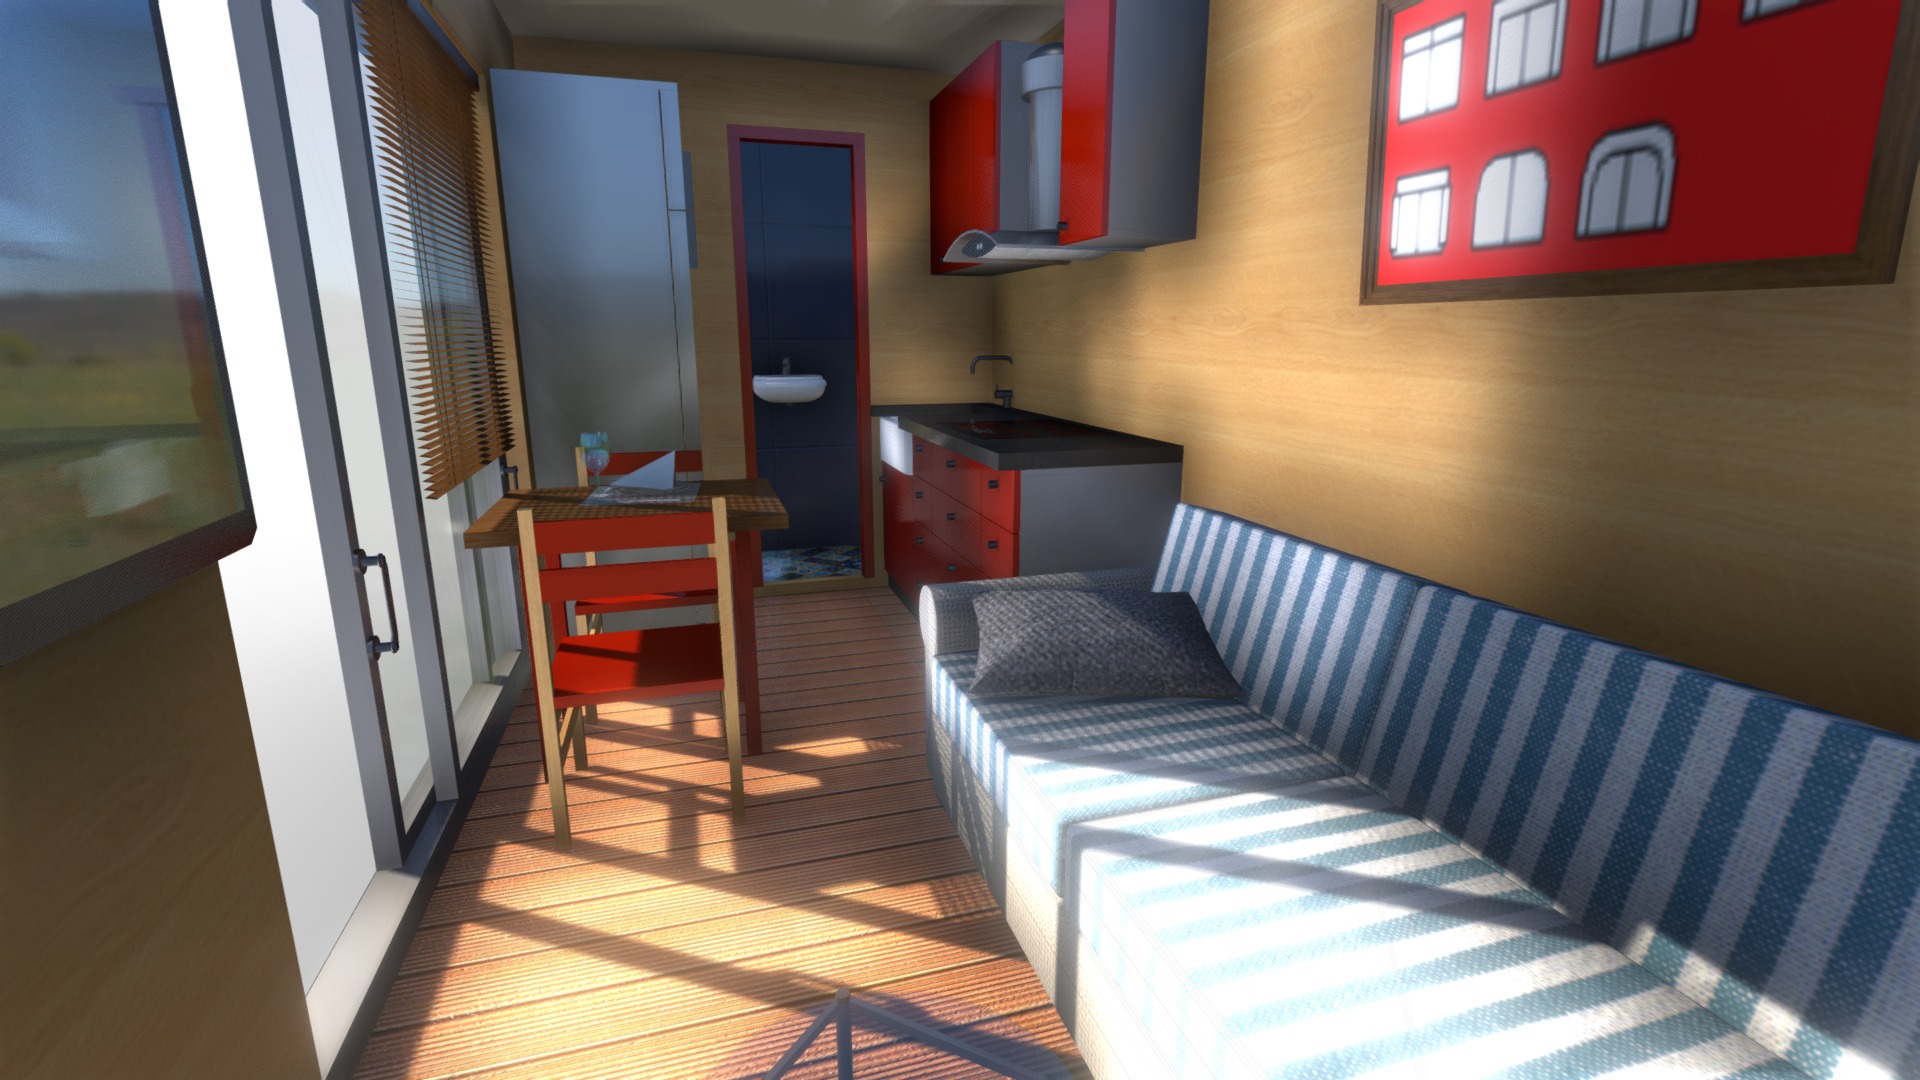 3D model Shipping Container Dream House – example =) - This is a 3D model of the Shipping Container Dream House - example =). The 3D model is about a room with a bed and a desk.